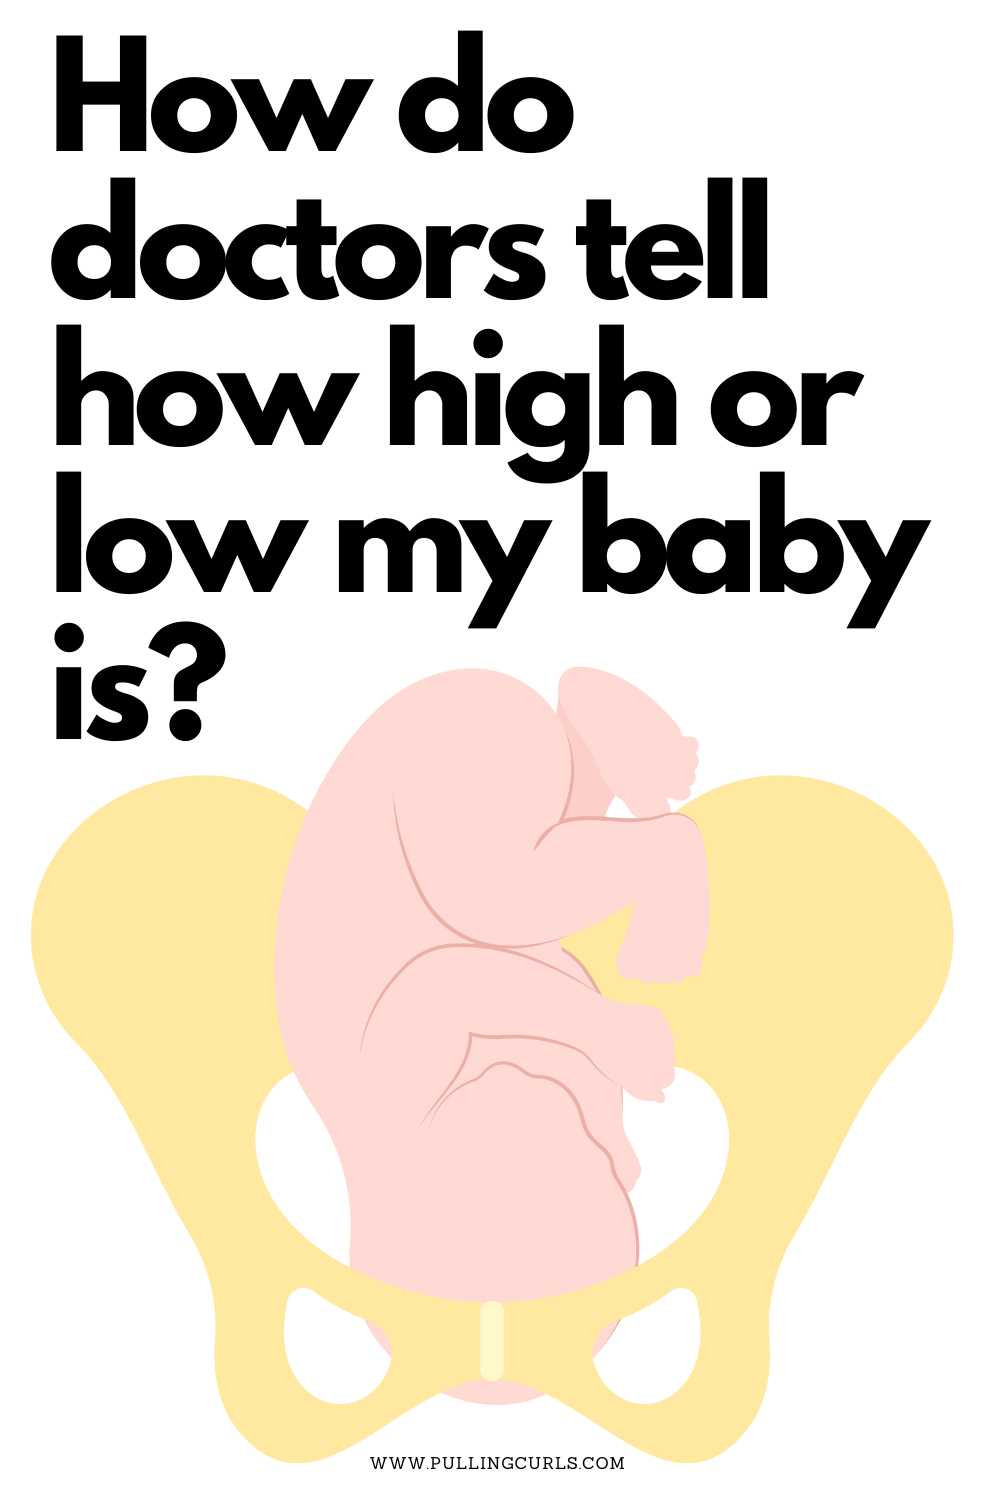 baby in pelvis / how do doctors tell how high or low my baby is? via @pullingcurls